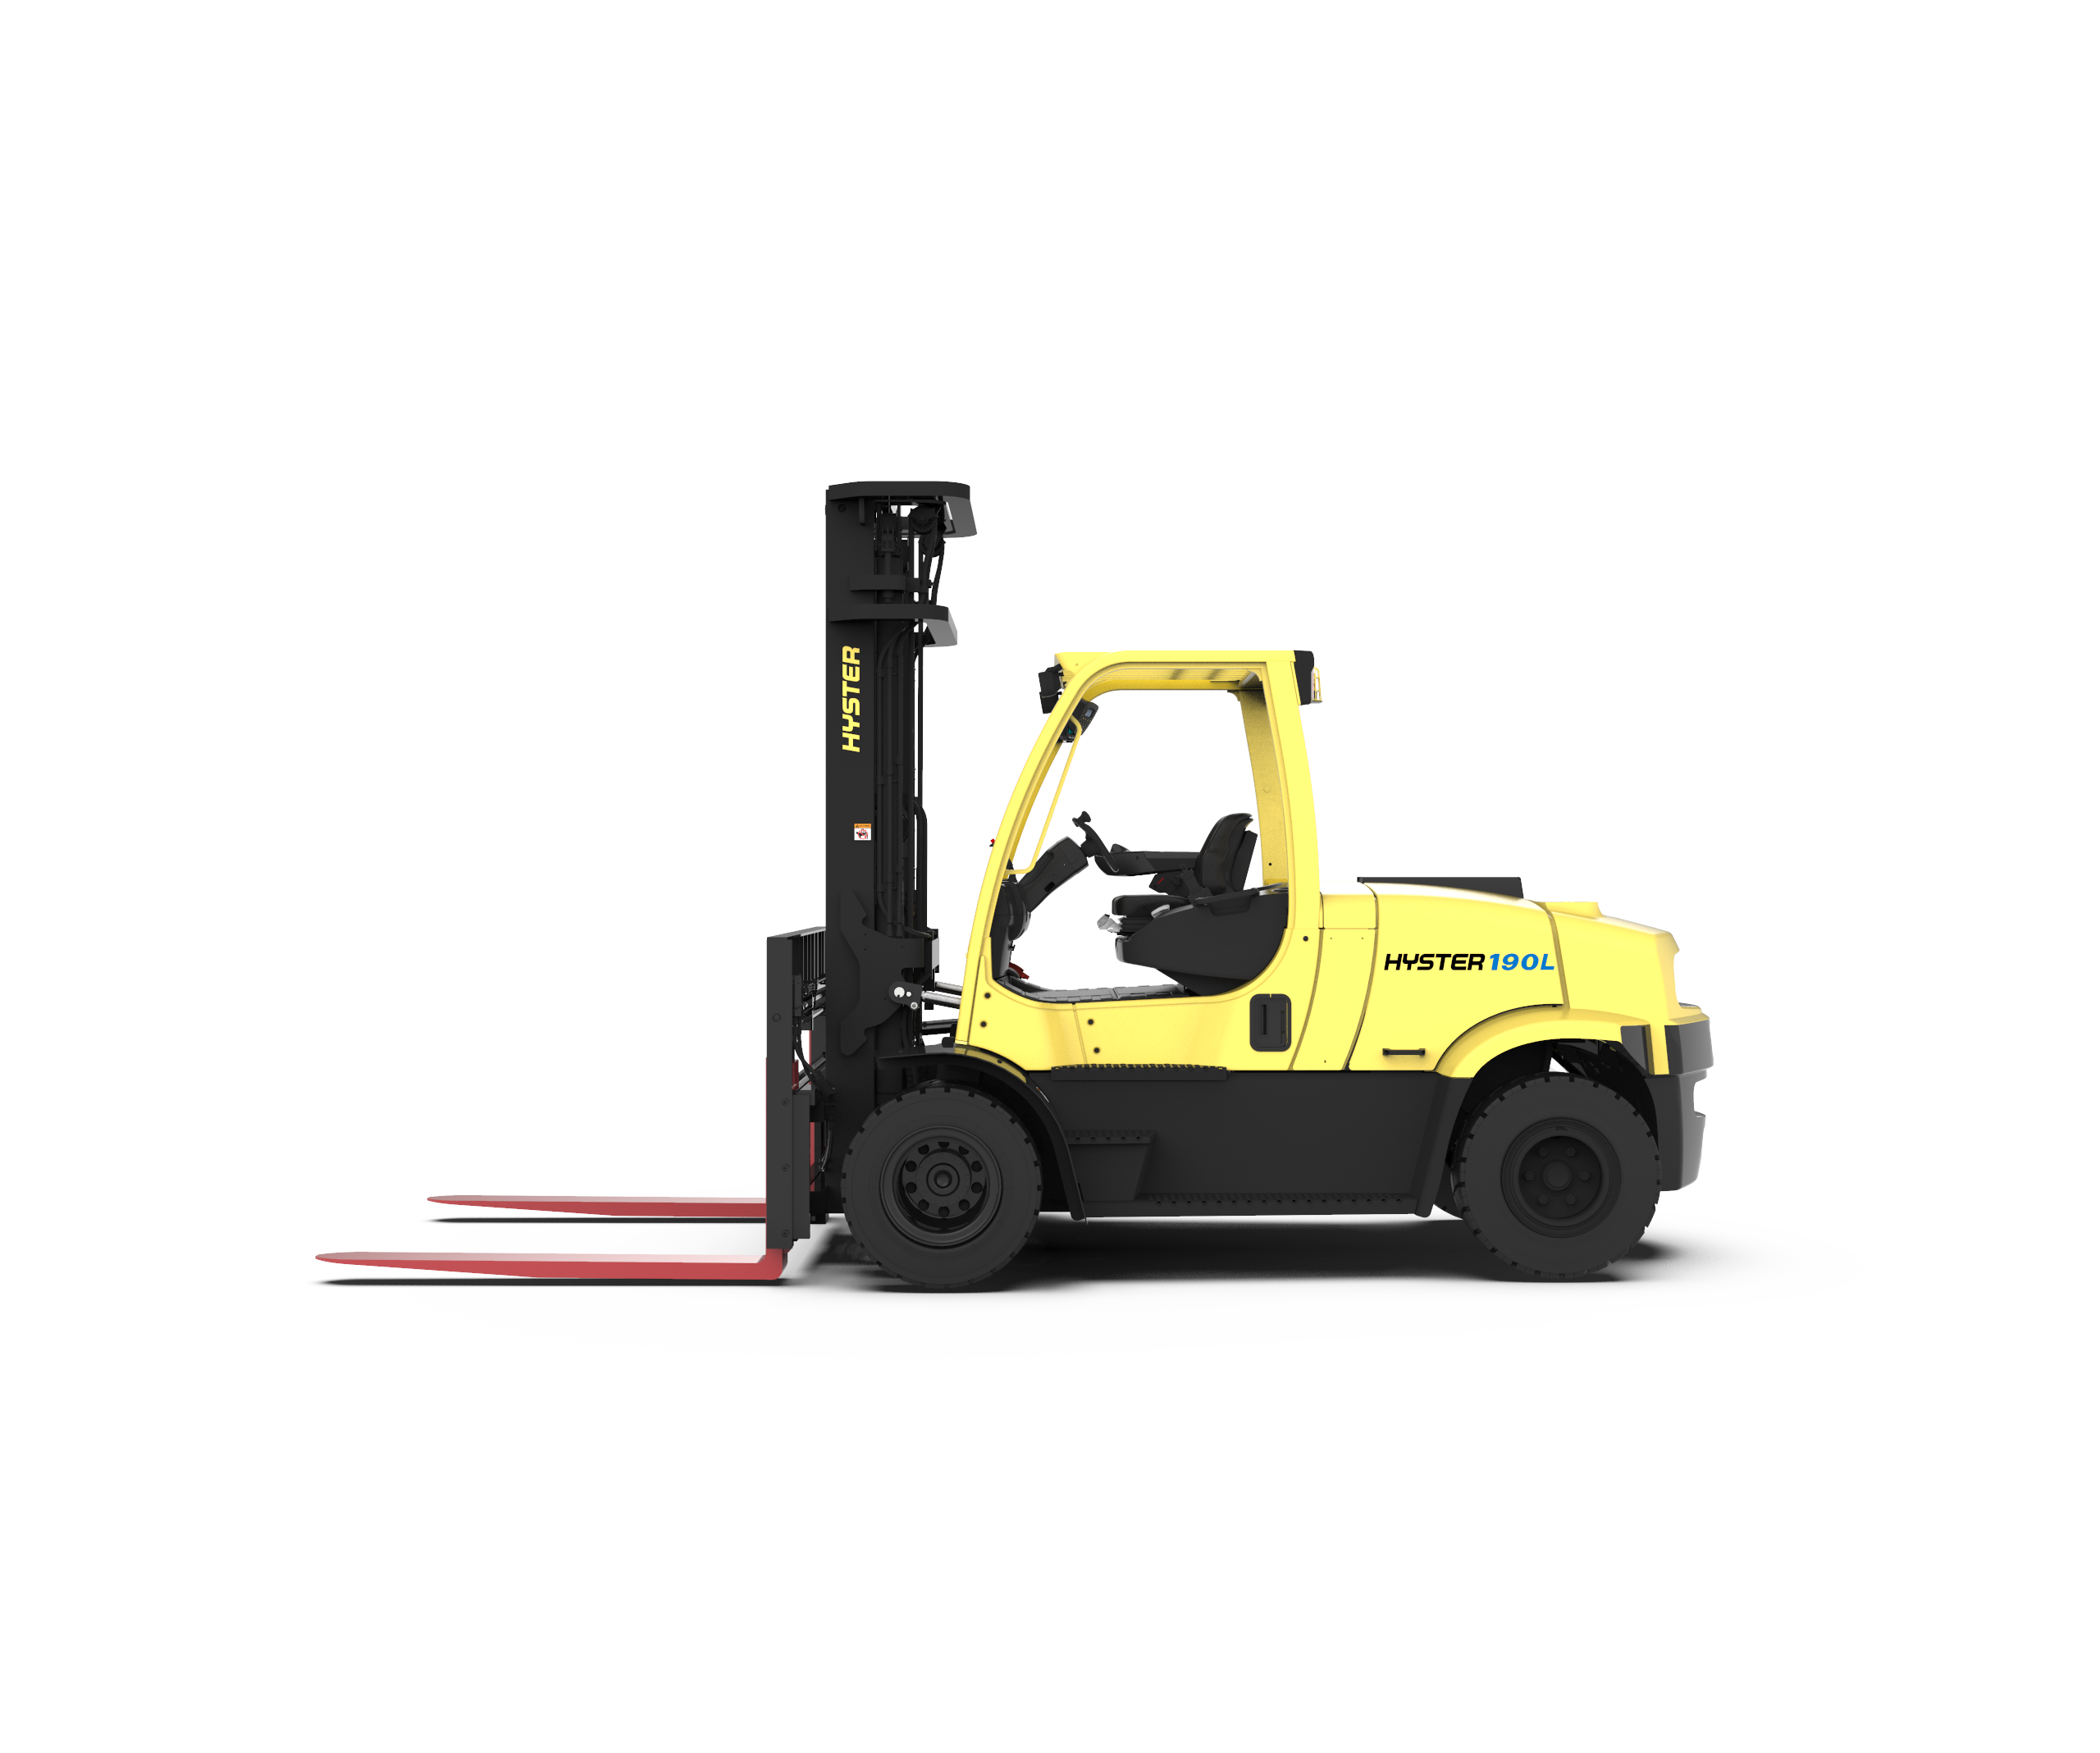 J155-190XNL Integrated Lithium-ion Electric Forklift